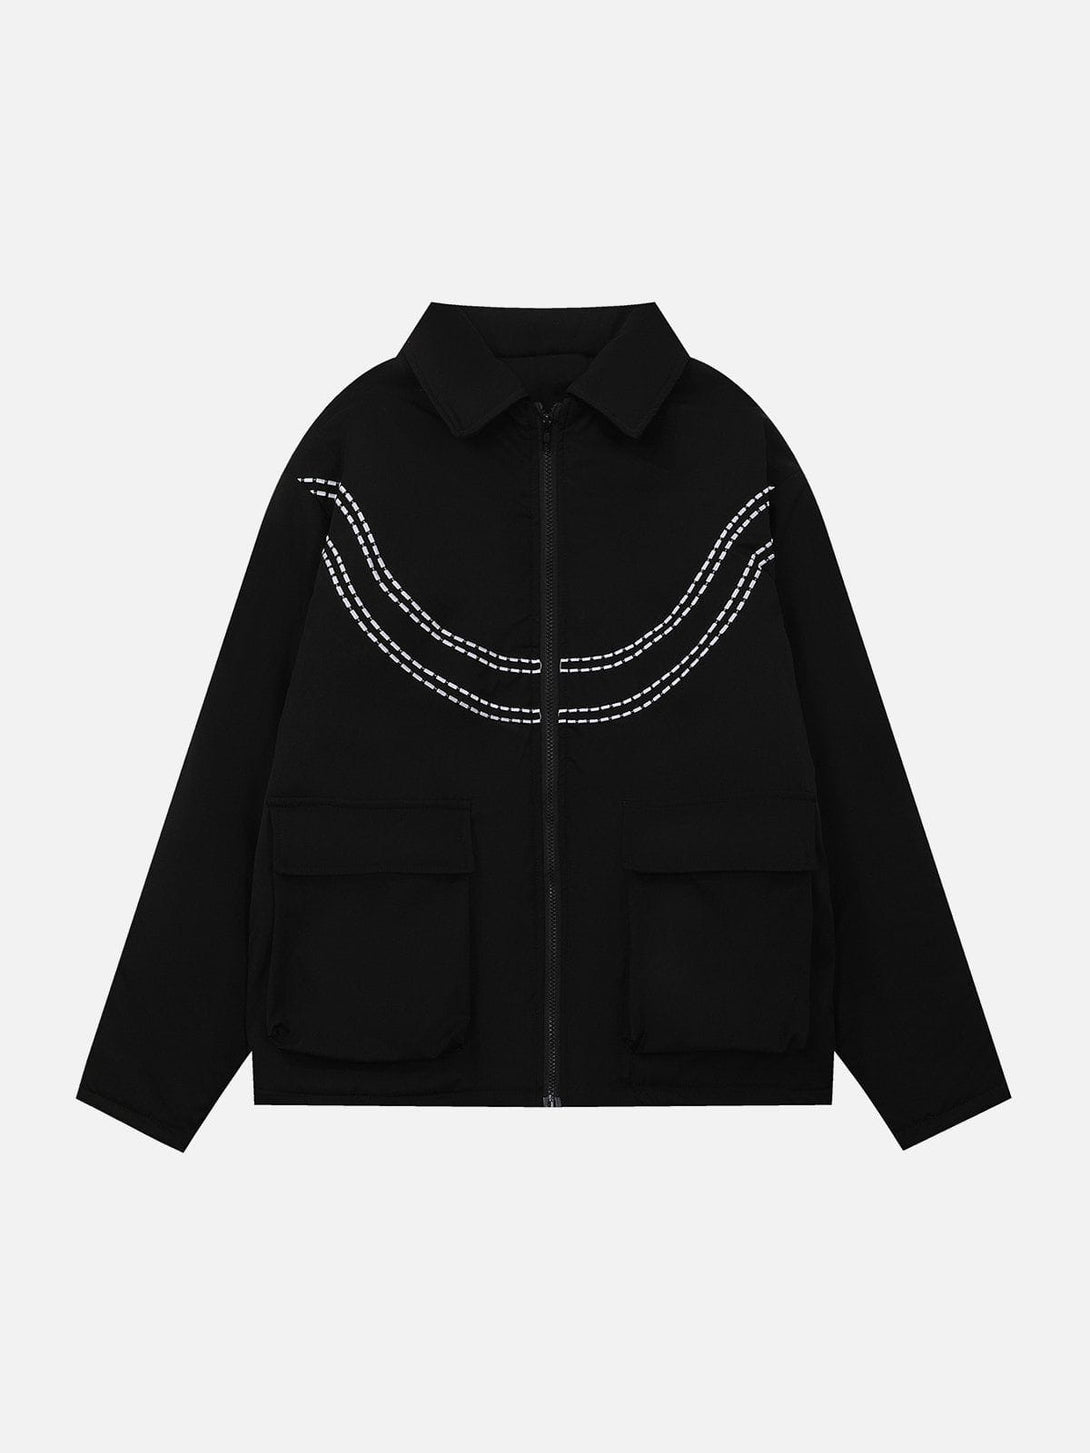 Majesda® - Vintage Patch Letters Winter Coat outfit ideas streetwear fashion